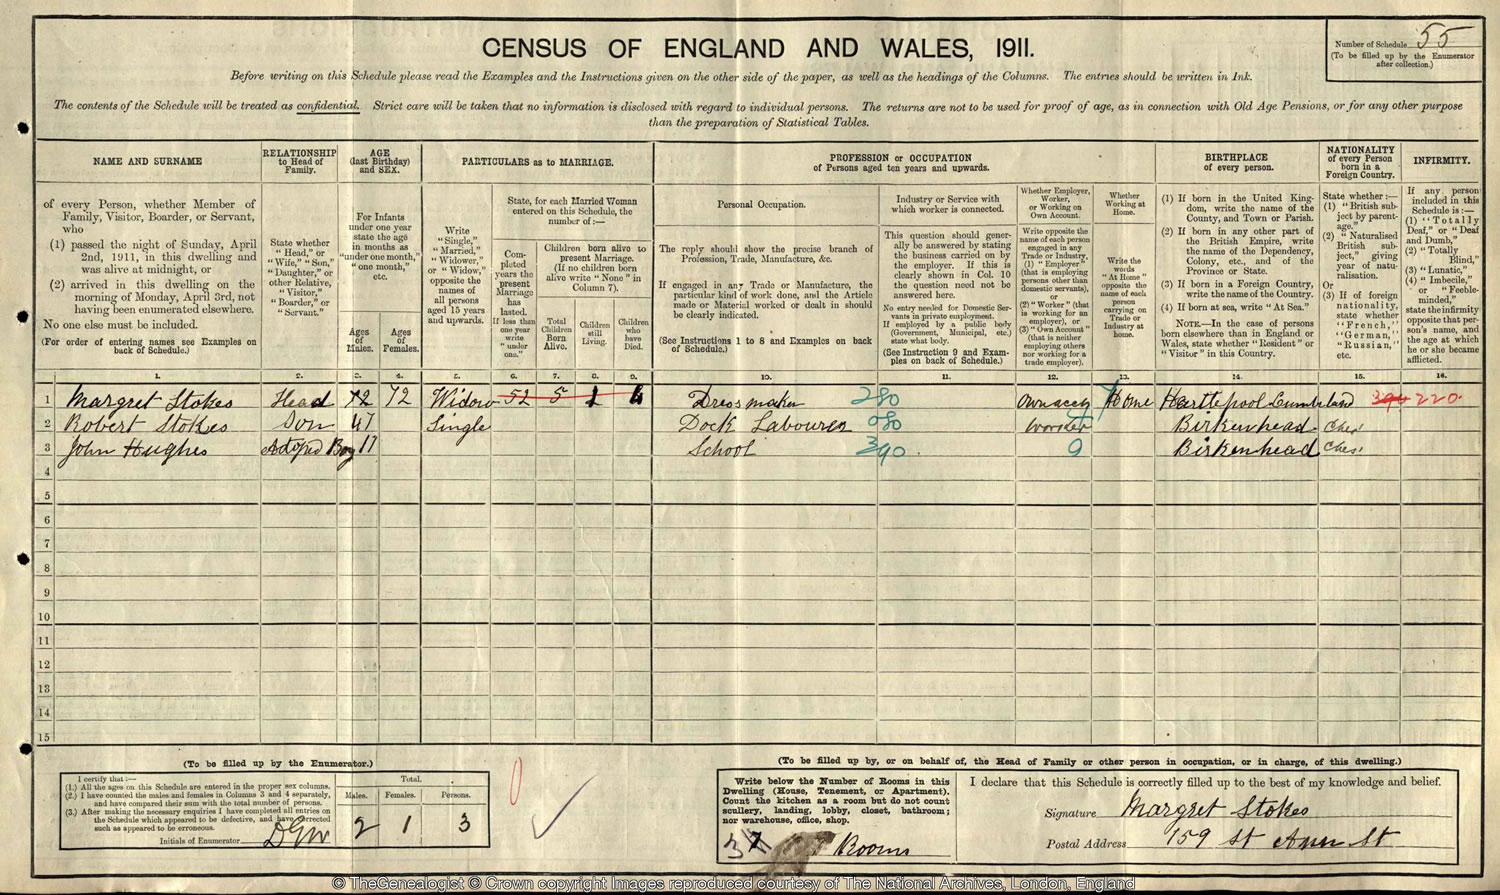 1911 census on TheGenealogist reveals that John Hughes Jr adopted by Margaret Stokes